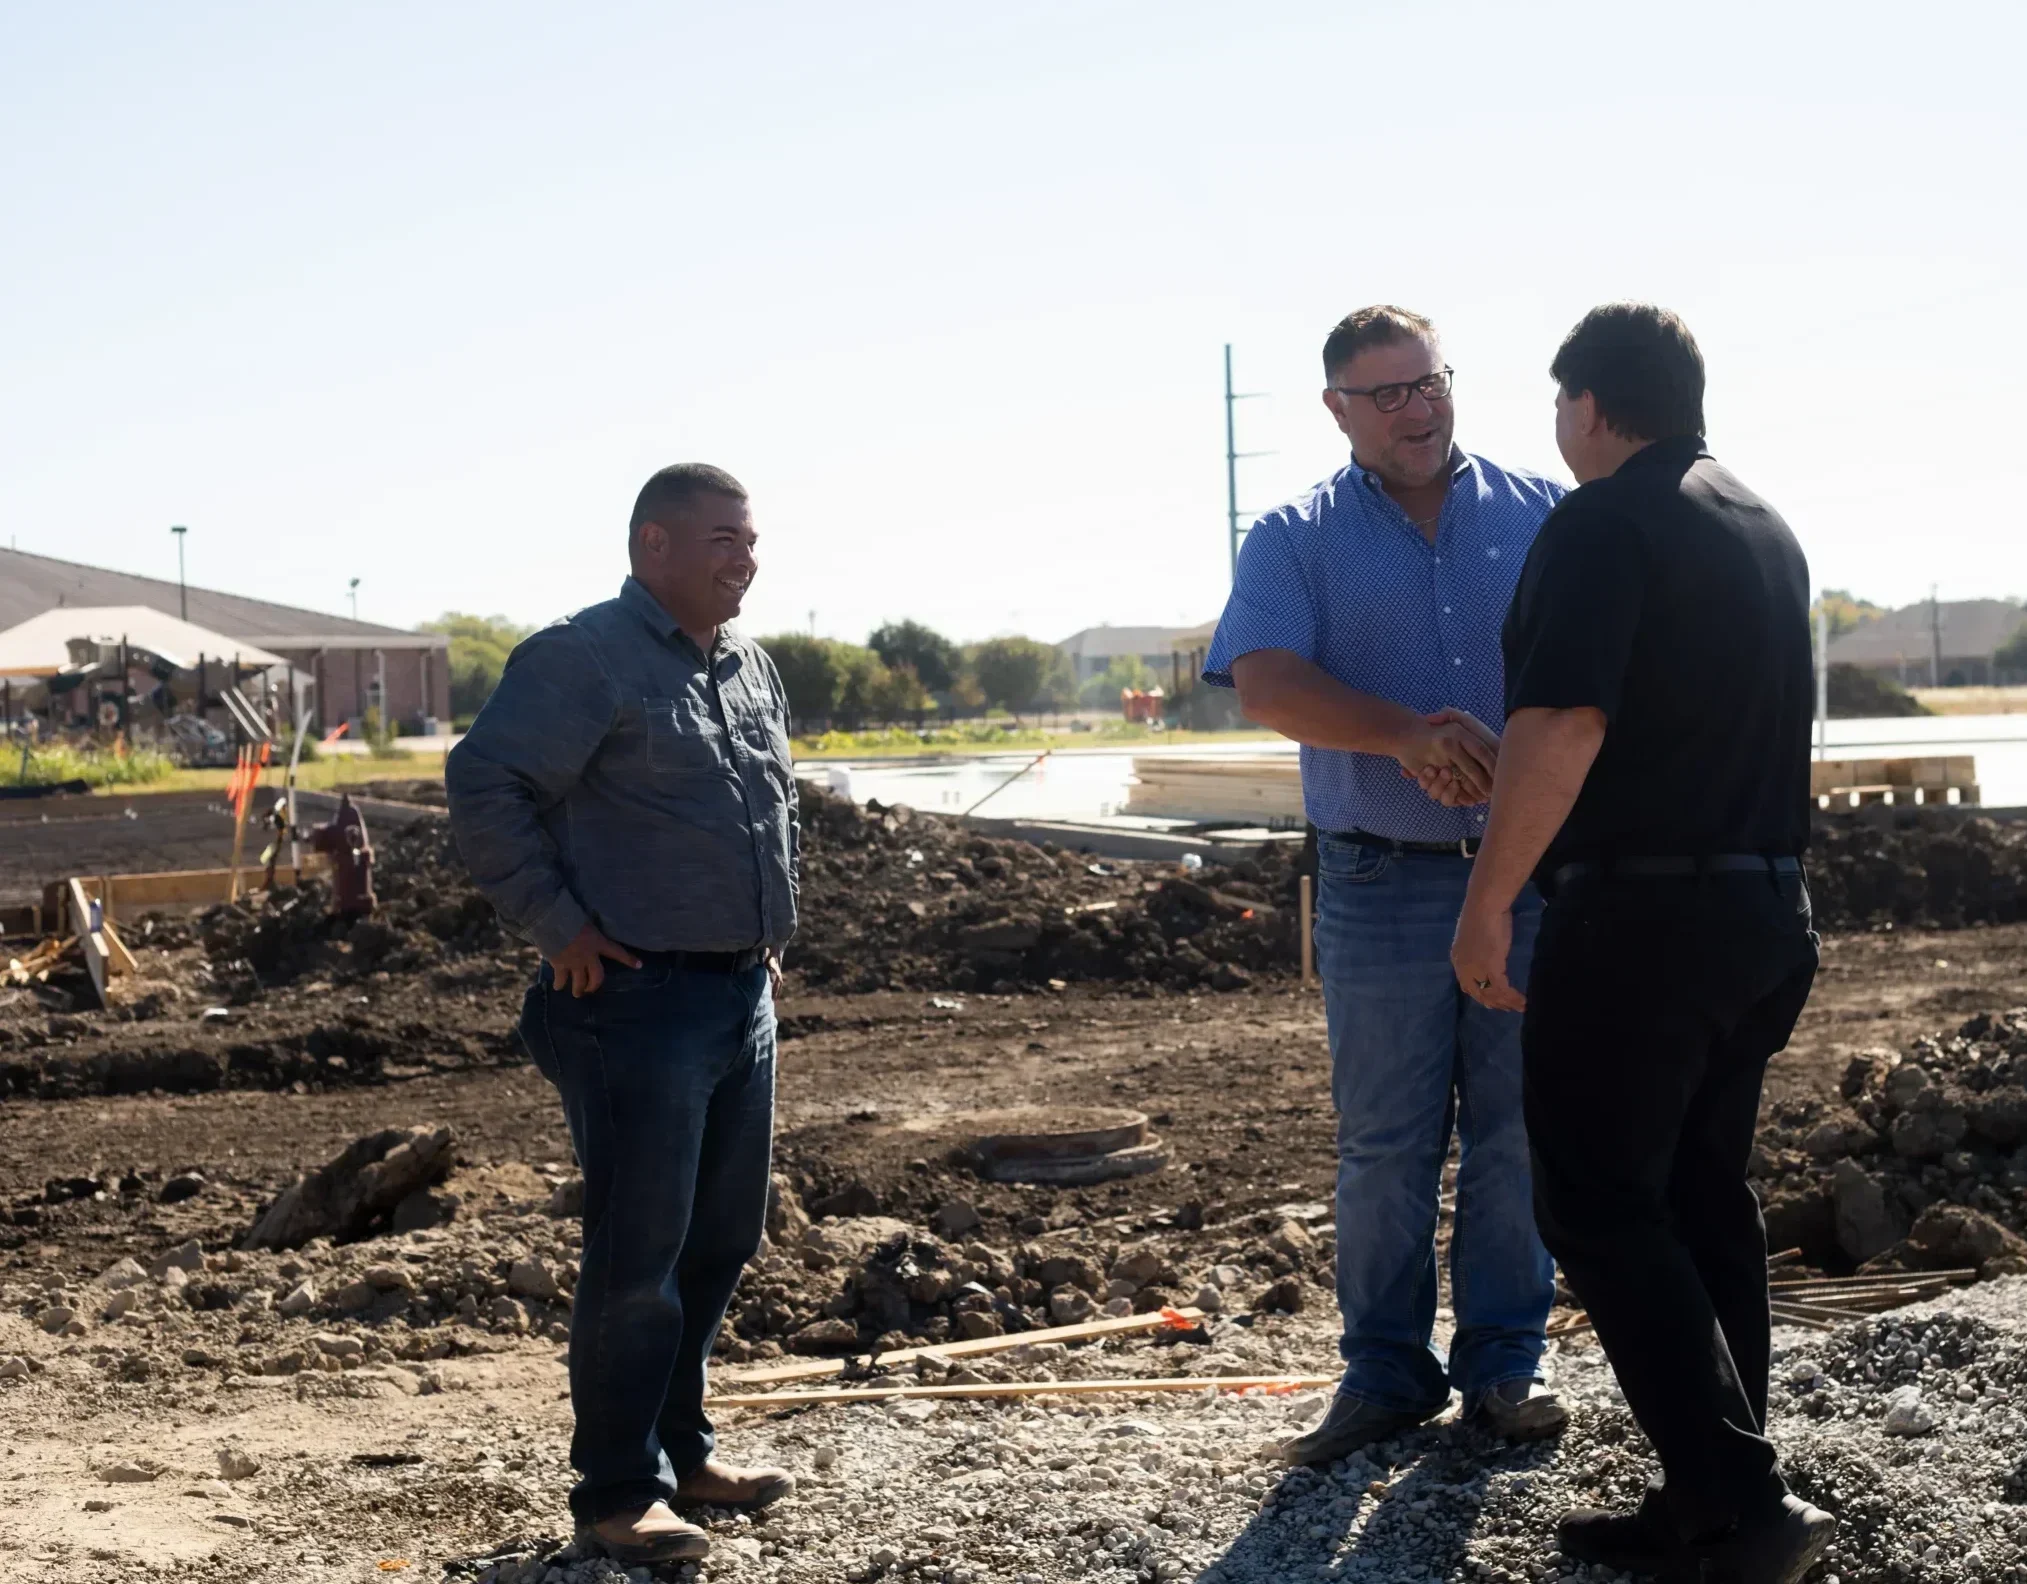 Three Cardinal Strategies workers on construction site visit, two of them are shaking hands